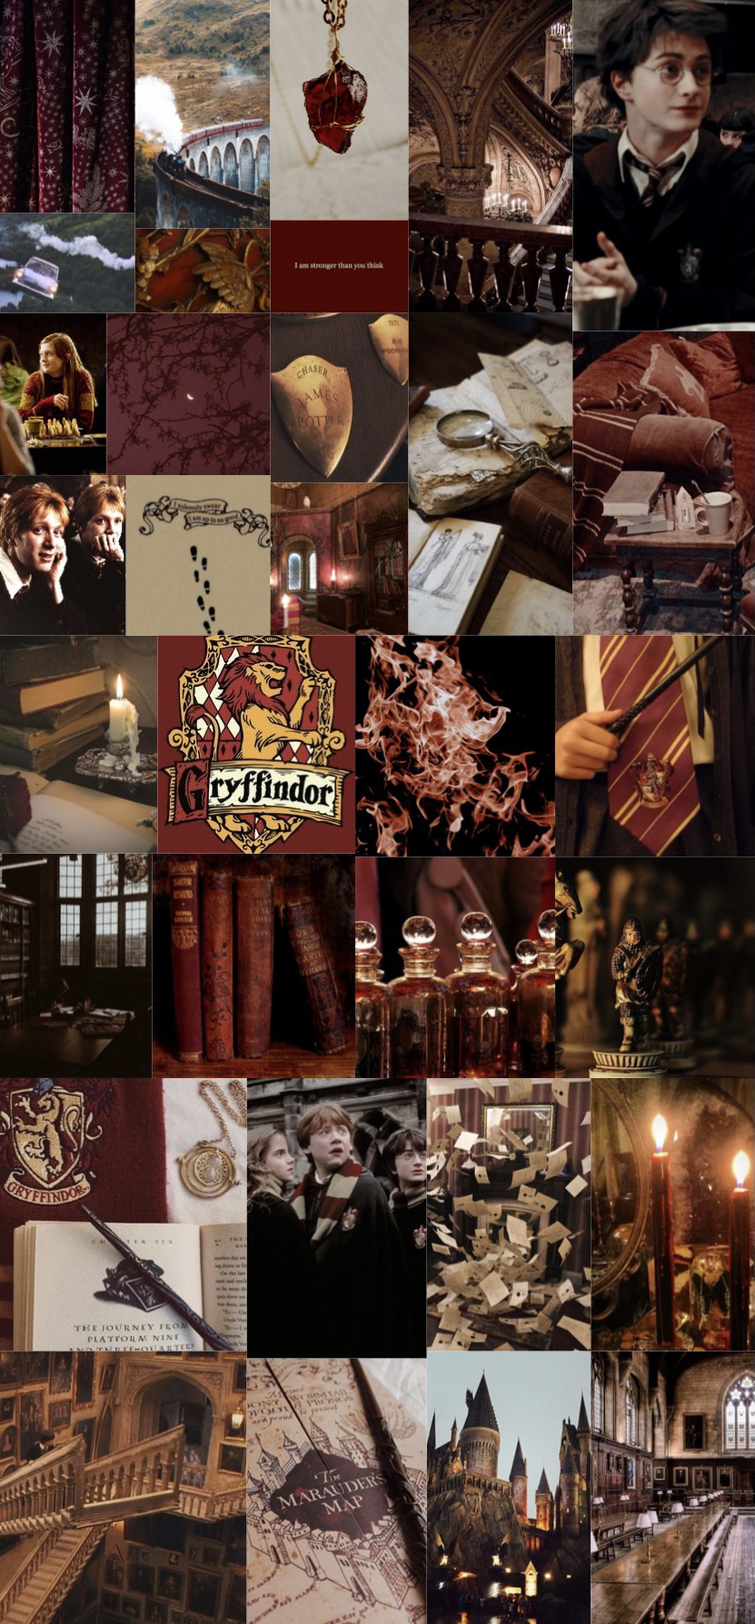 Aesthetic Gryffindor Wallpapers